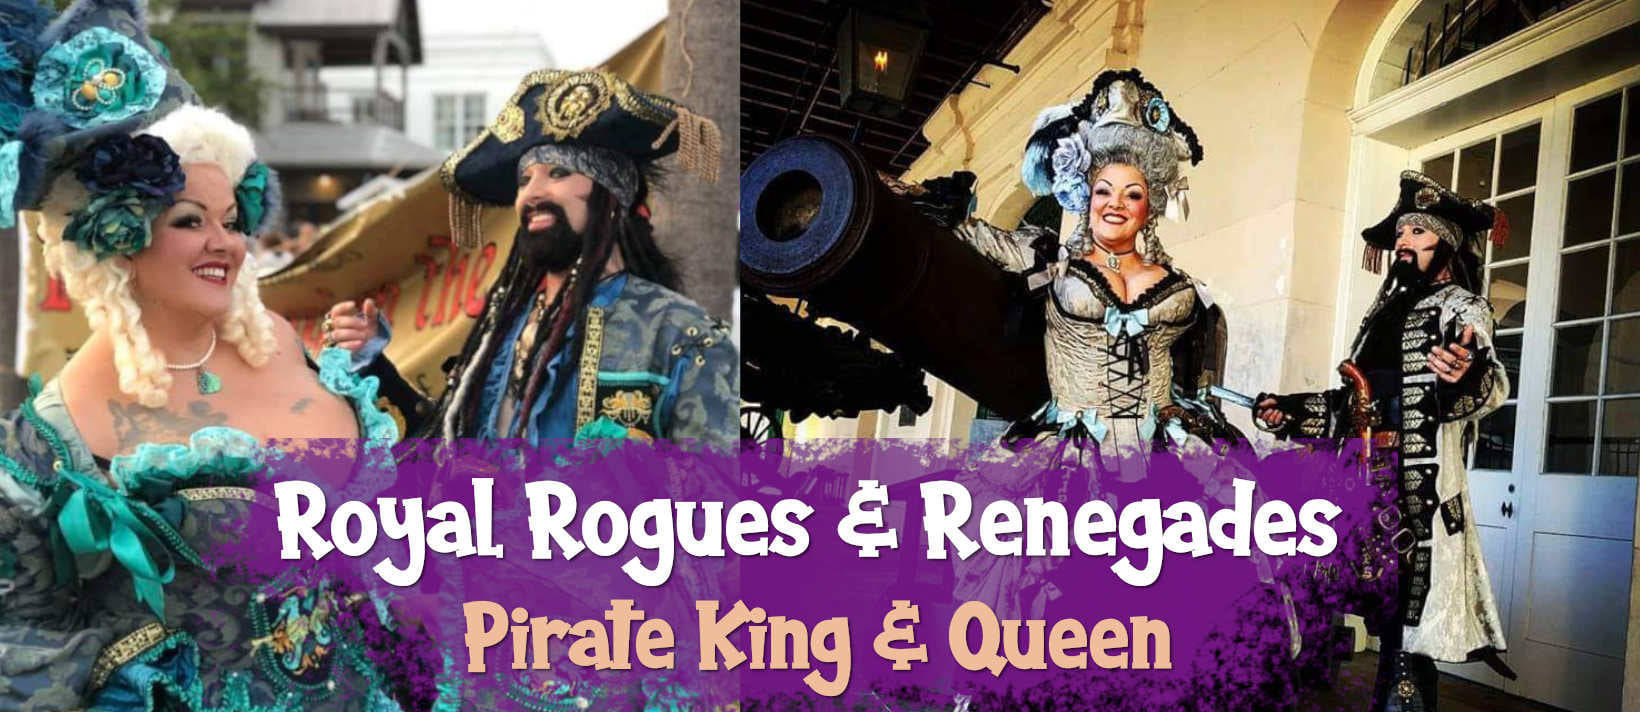 pirate king and queen banner